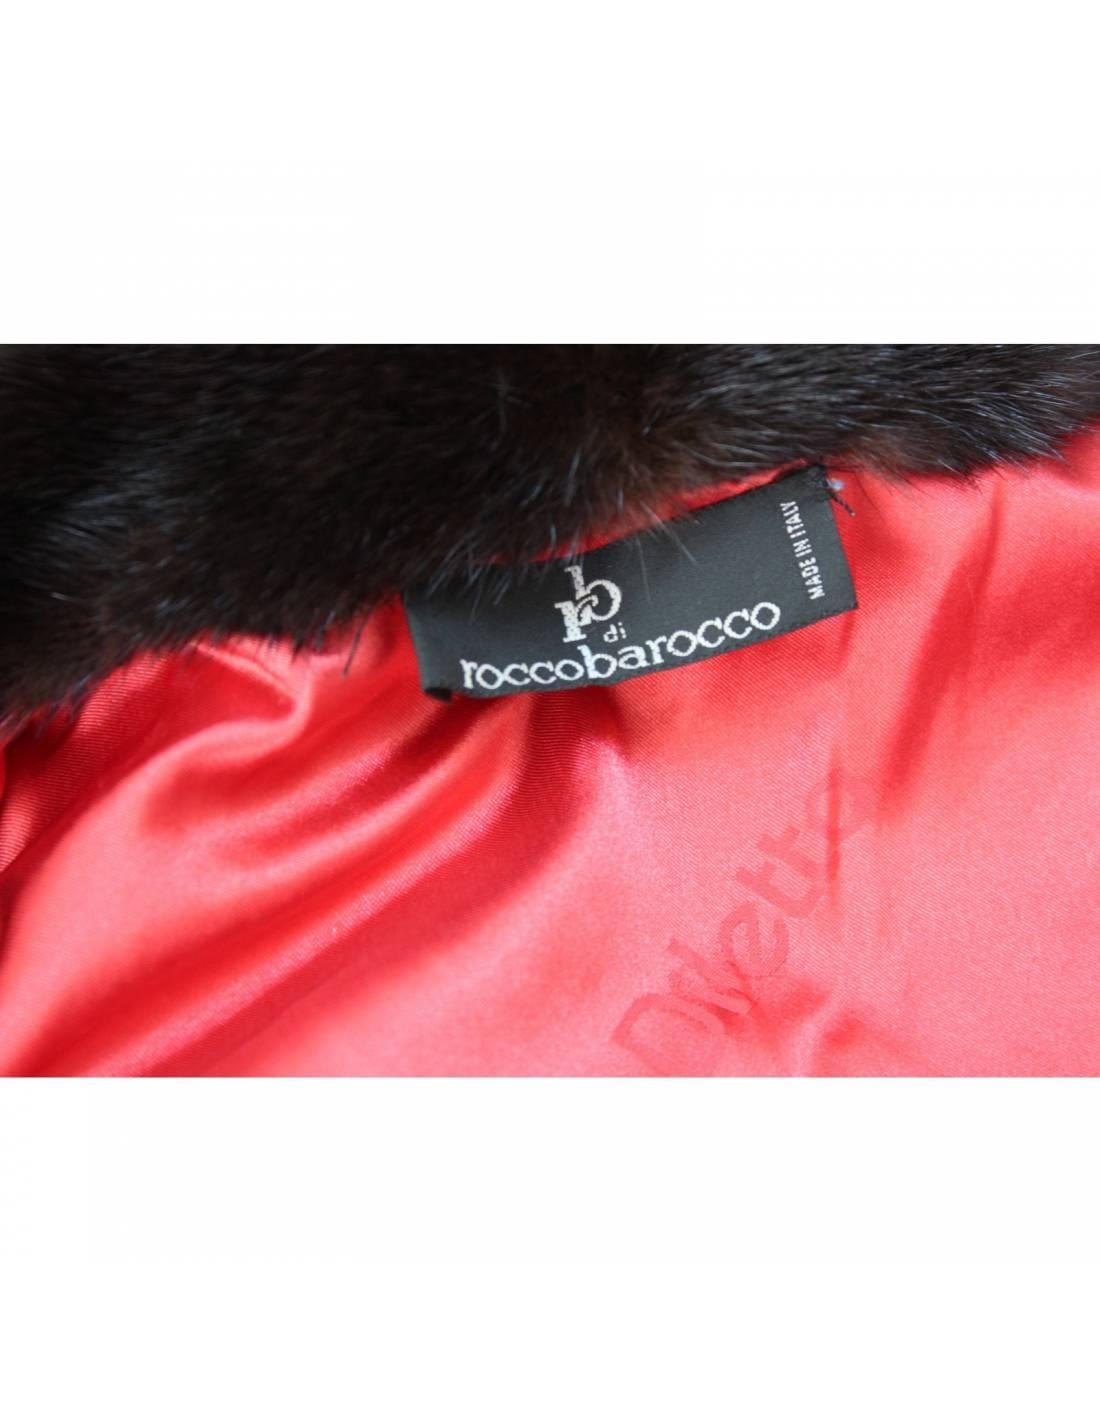 Roccobarocco Black Fur Faux Leather Biker Jacket In Excellent Condition In Brindisi, Bt